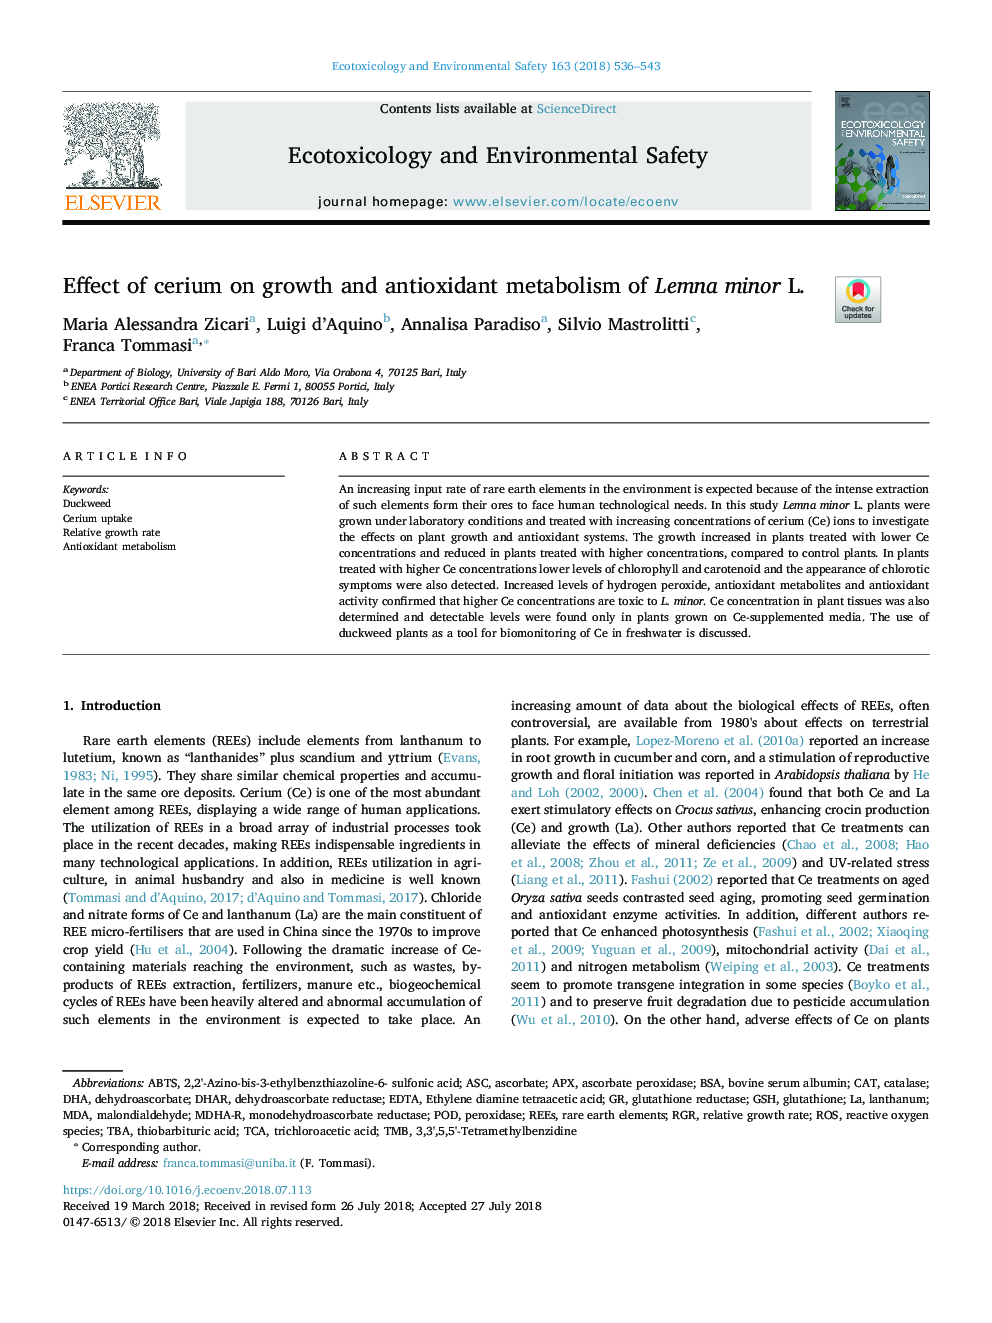 Effect of cerium on growth and antioxidant metabolism of Lemna minor L.